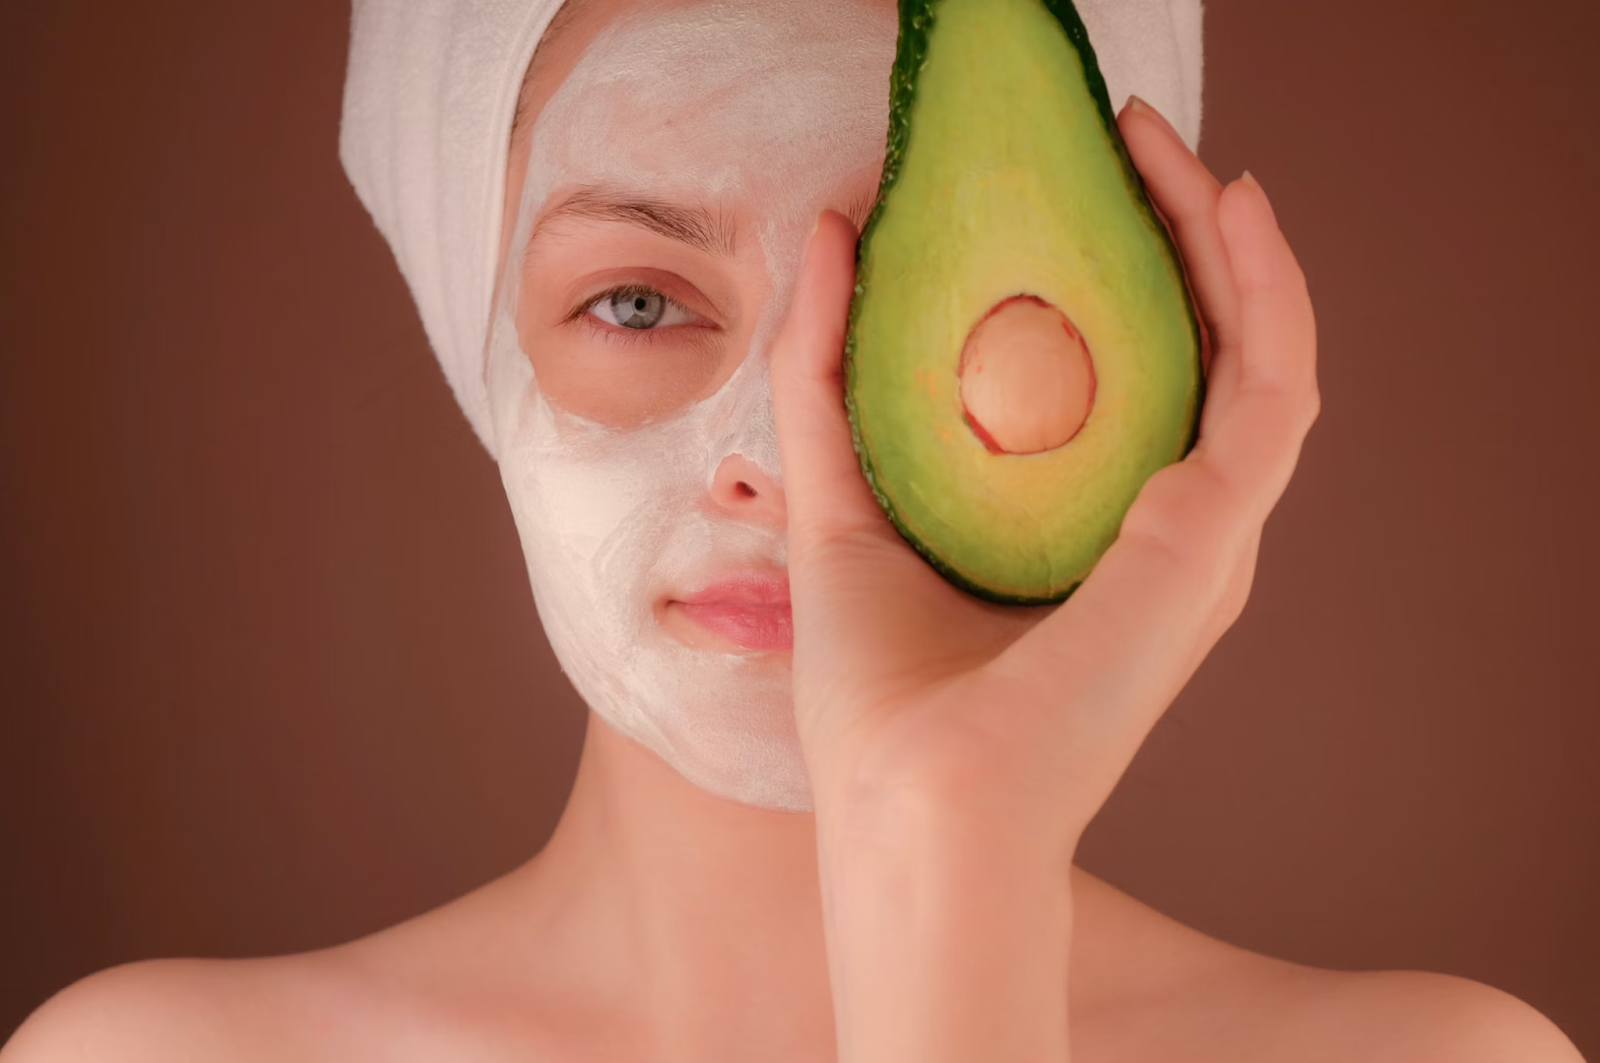 woman with white face mask applied holding up half an avocado